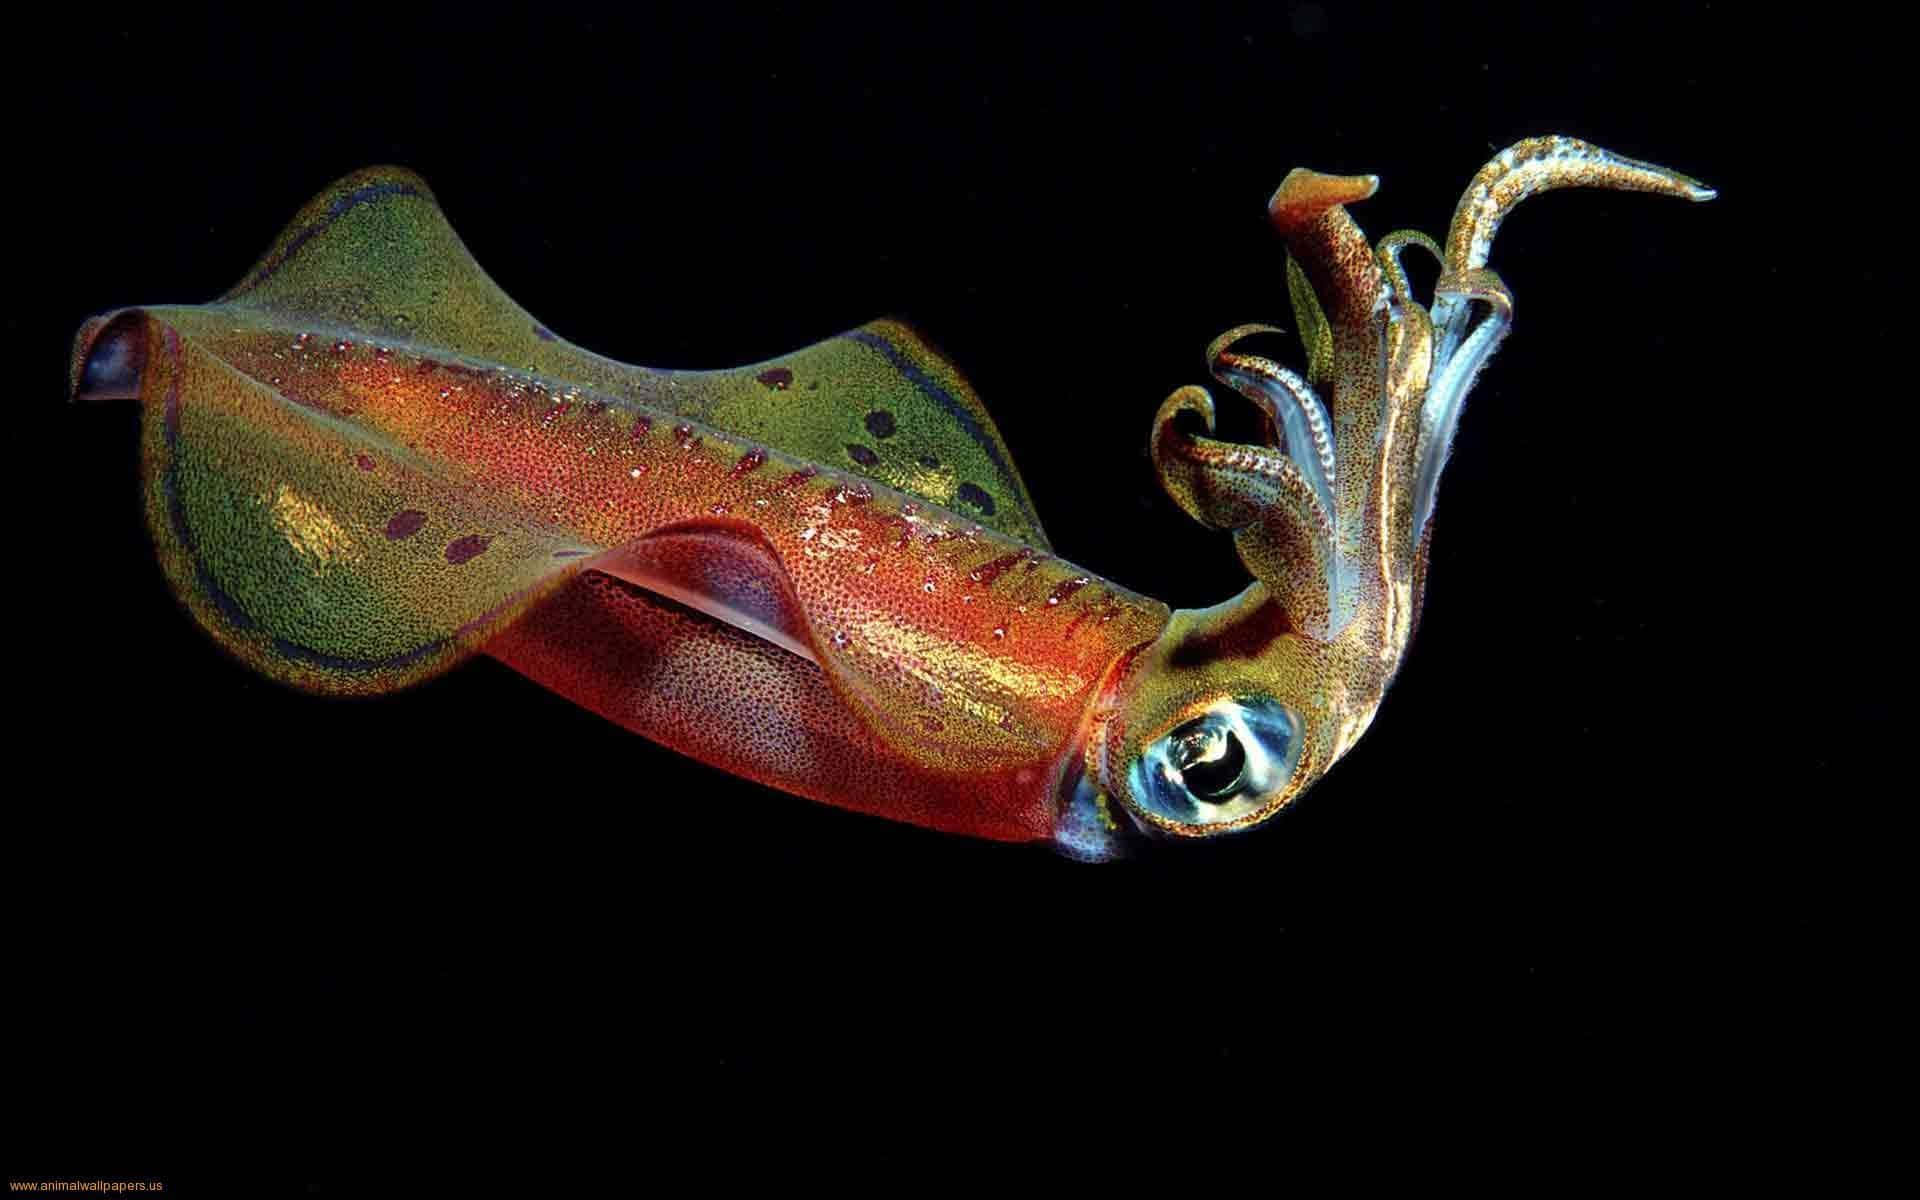 A Squid With A Long Tail And Orange Color